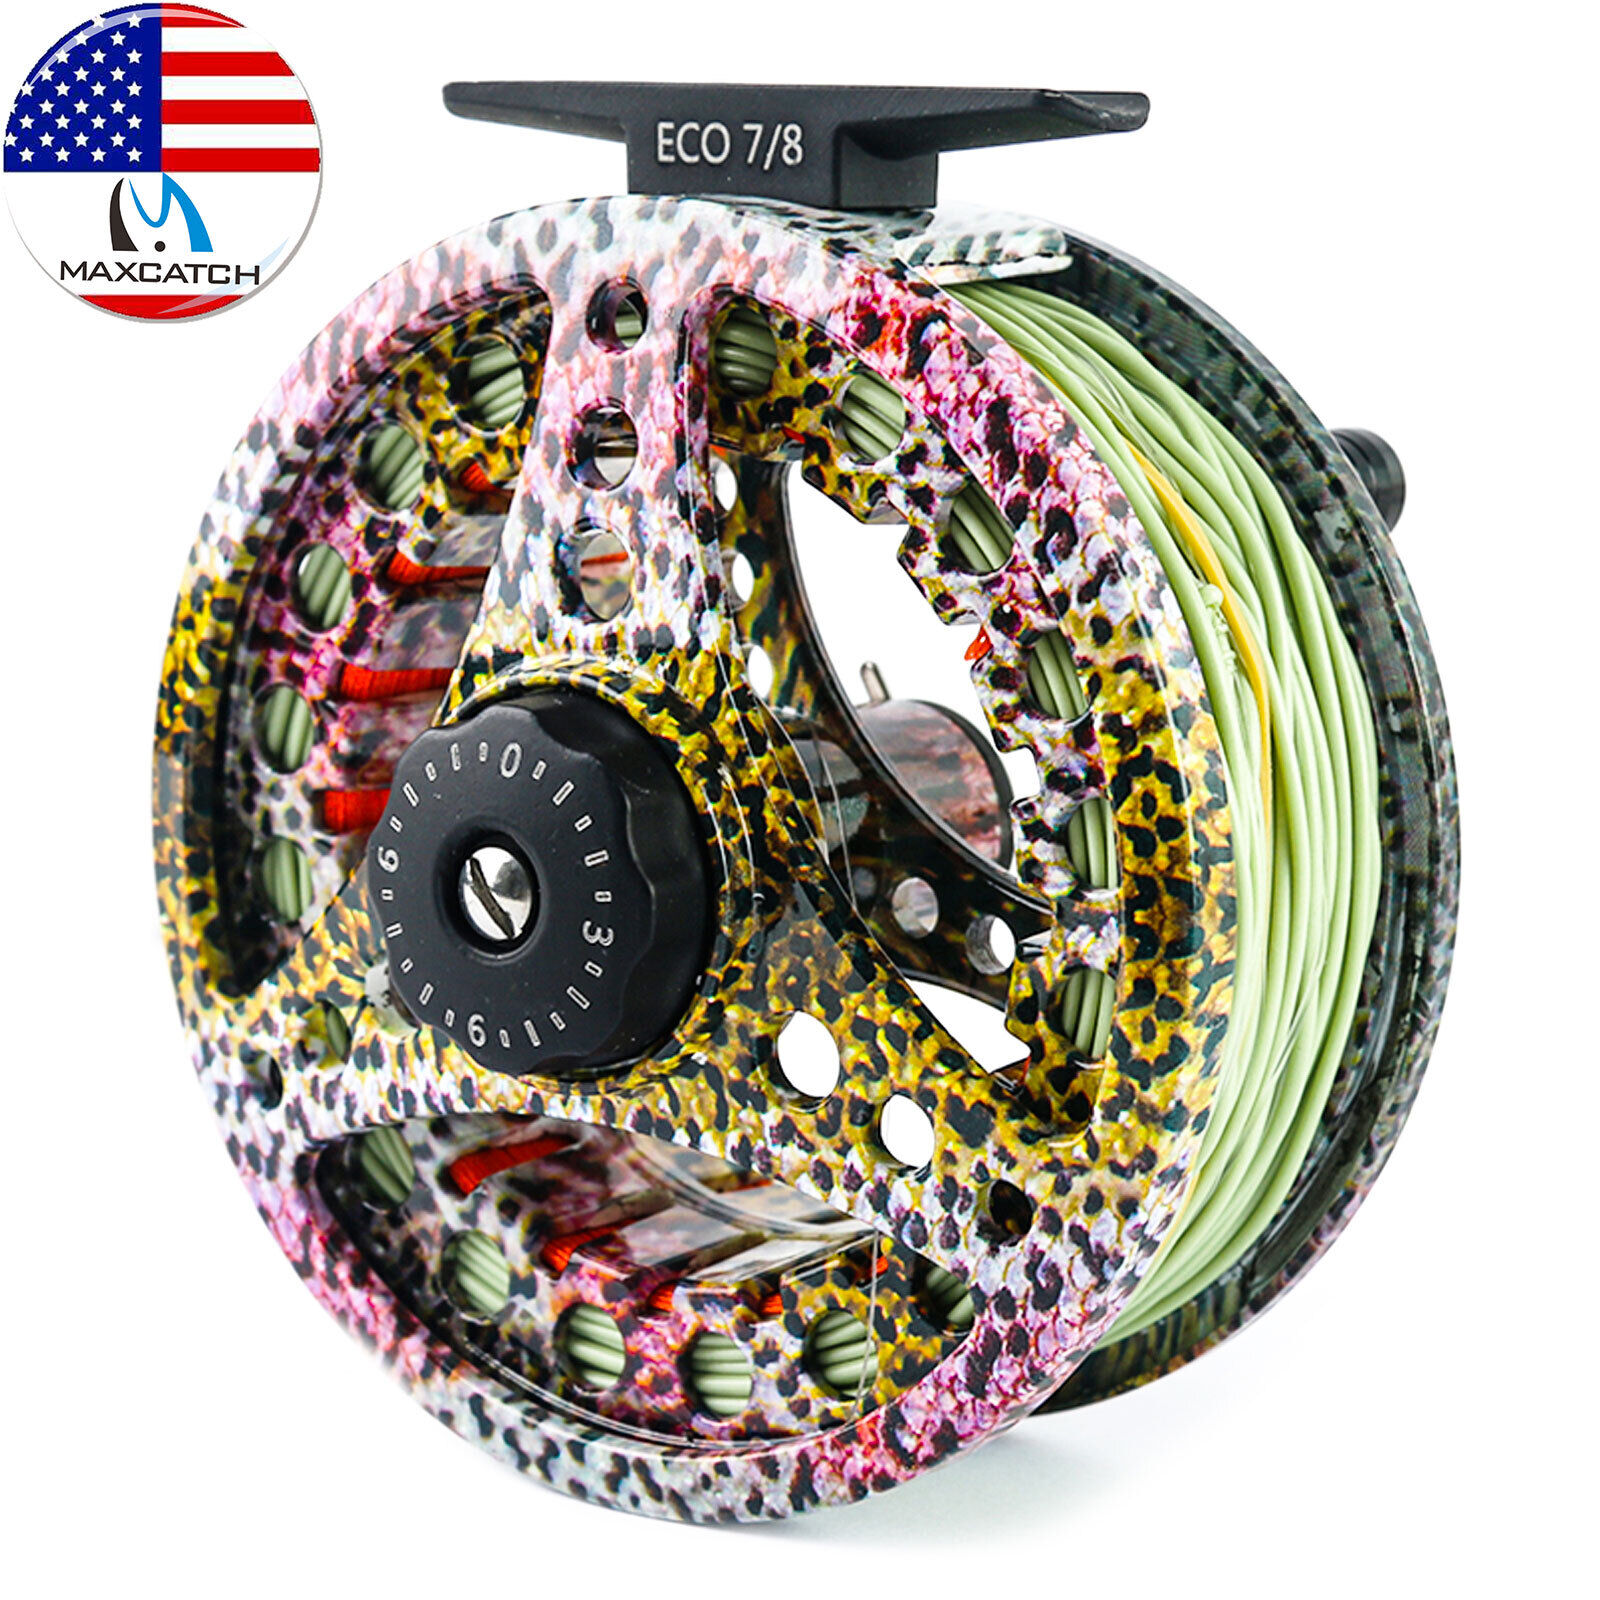 Maxcatch 3/4 5/6 7/8wt Pre-Loaded Fly Fishing Reel with Fly Line